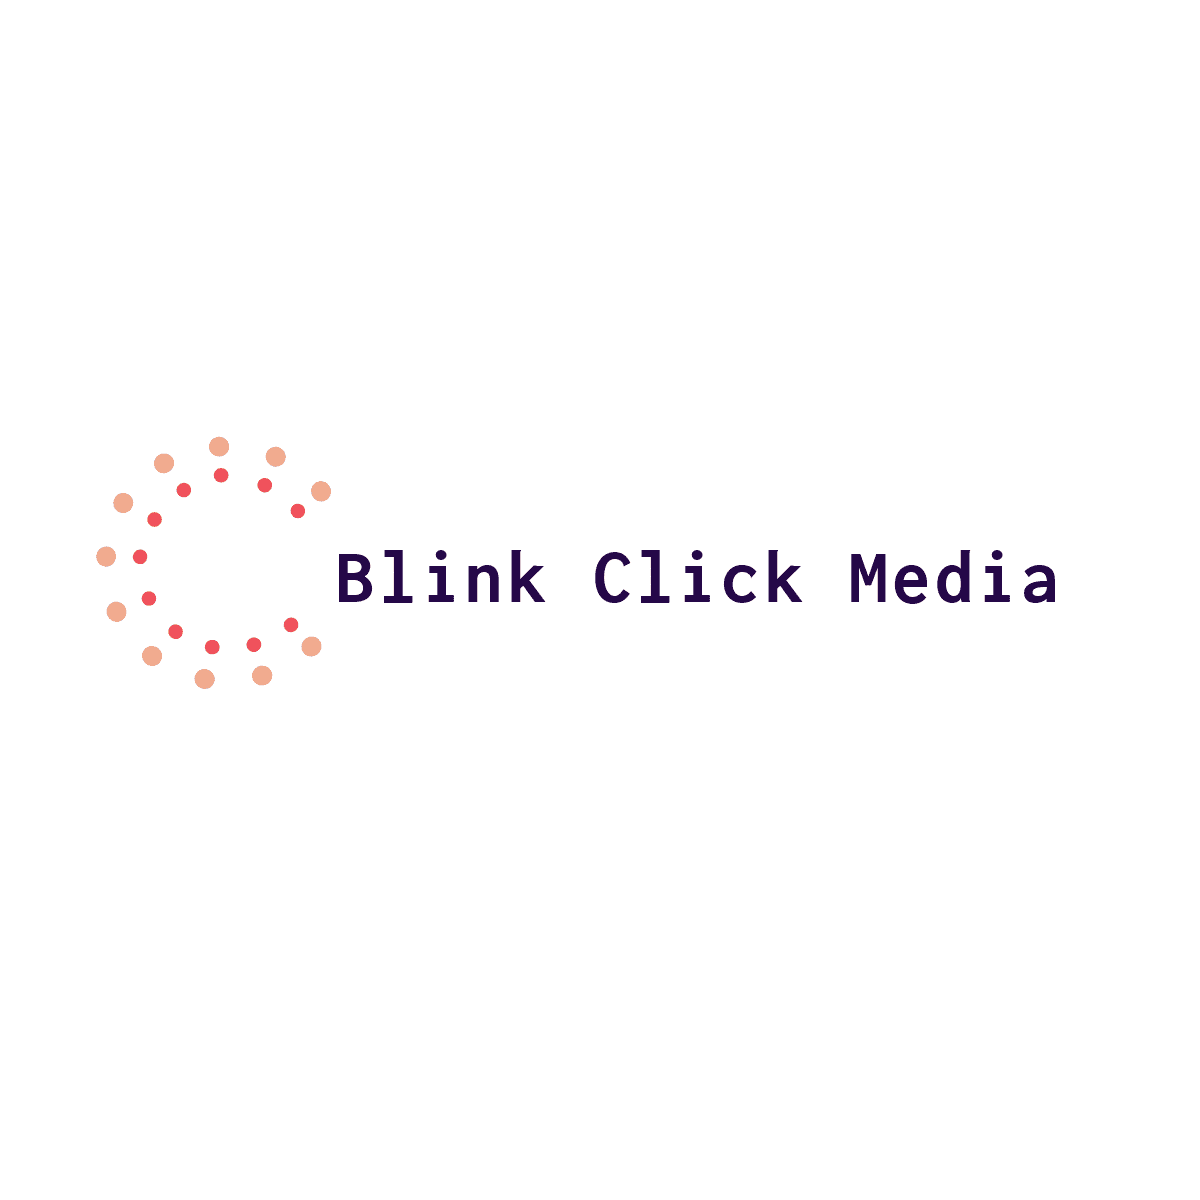 Blink Click Media profile on Qualified.One